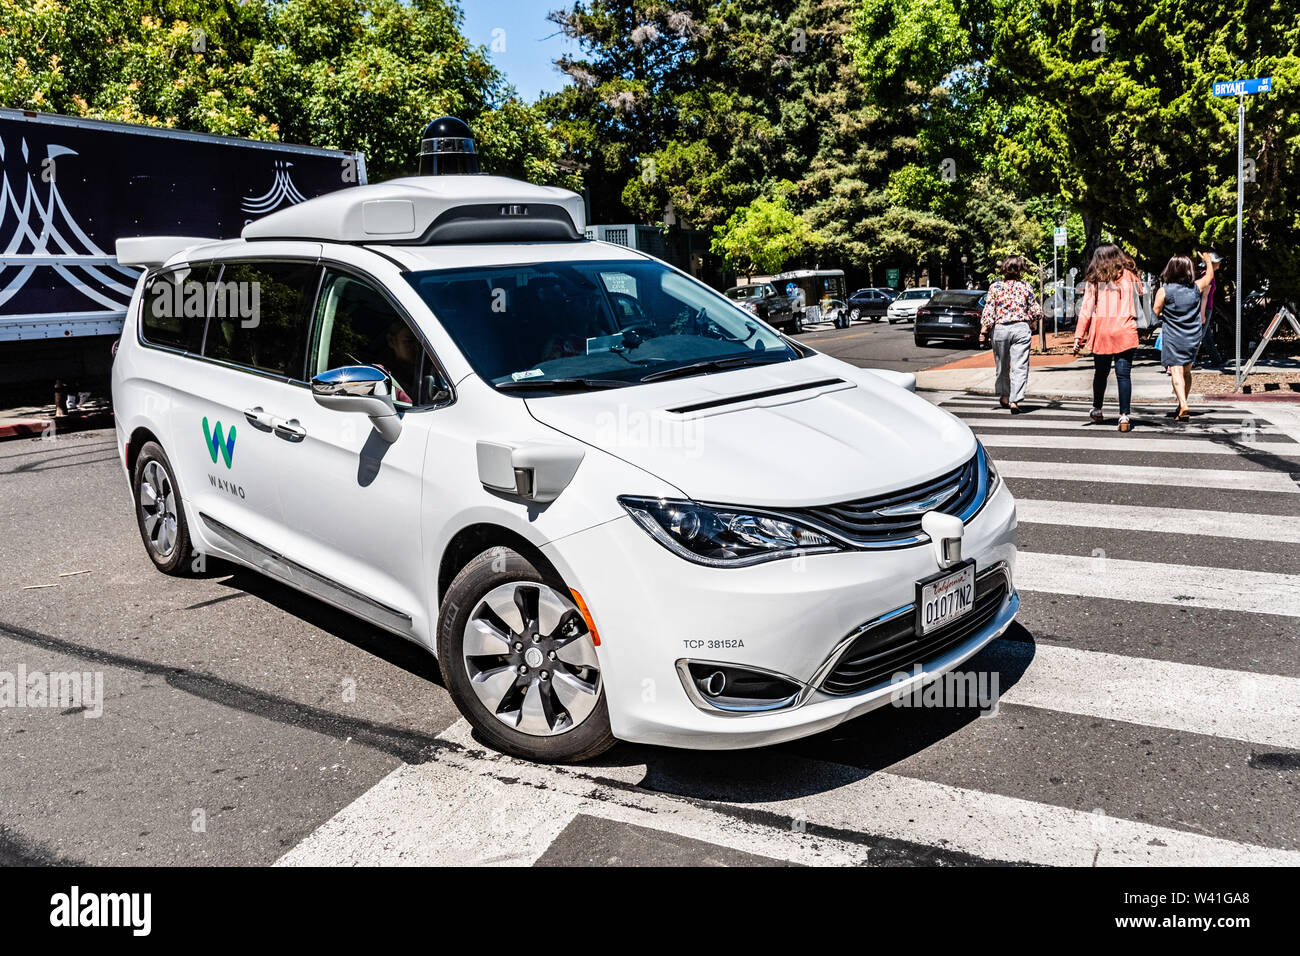 July 16, 2019 Mountain View / CA / USA - Waymo self driving car performing tests on a street near Google's offices, Silicon Valley; Waymo, a subsidiar Stock Photo